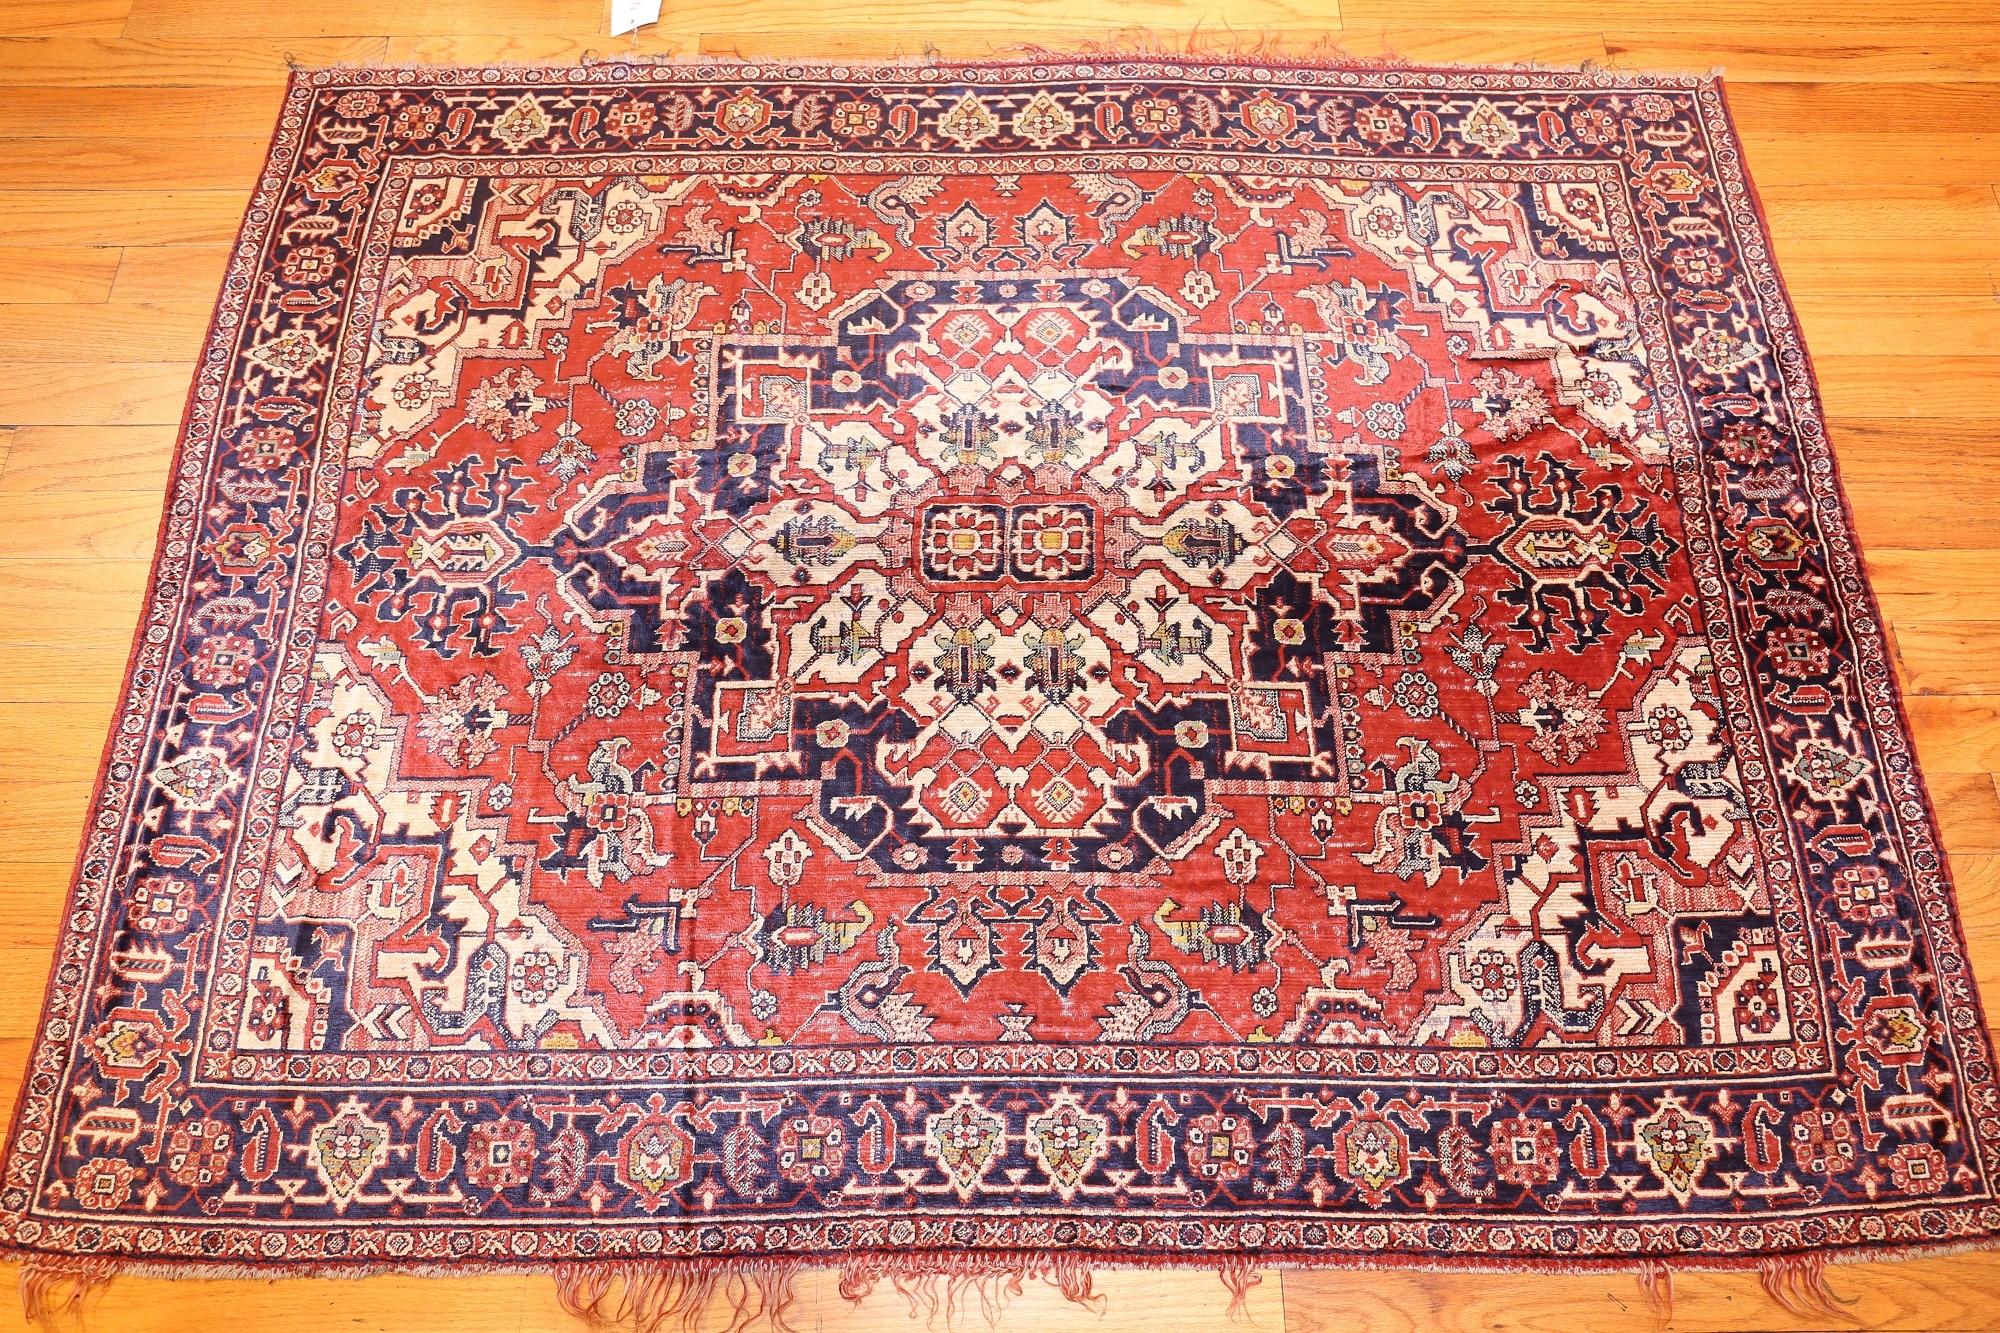 Antique American chenille rug, country of origin: America. Size: 4 ft 7 in x 6 ft (1.4 m x 1.83 m). 

Featuring a dominant coppery-red field with a contrasting medallion, this carpet is an excellent example of the stepped lozenge medallion and